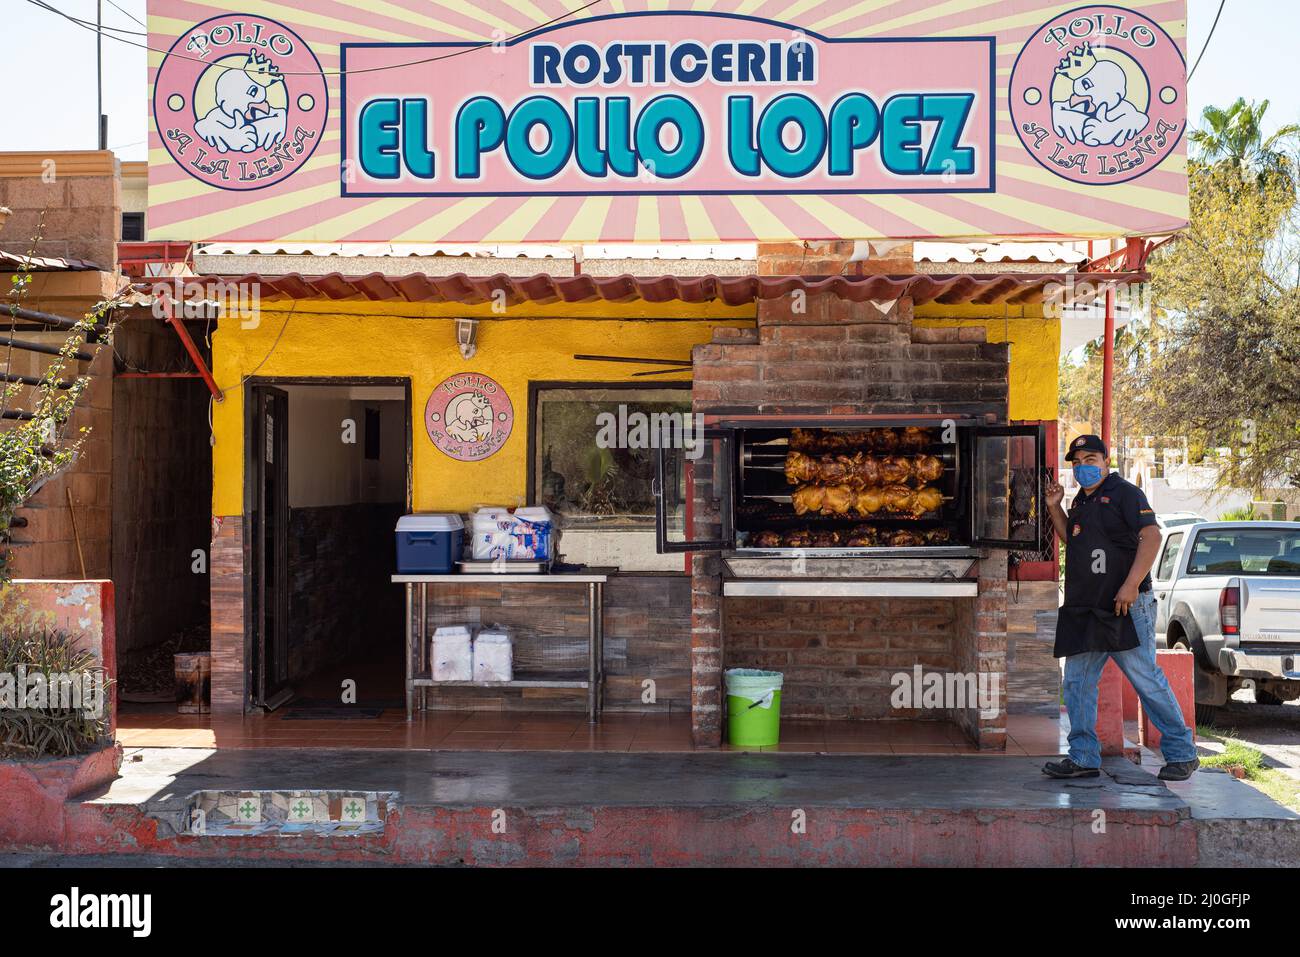 A cook stands next to chickens rotating on a spit in a storefront rotisserie oven for El Pollo Lopez in San Carlos, Sonora, Mexico. Stock Photo